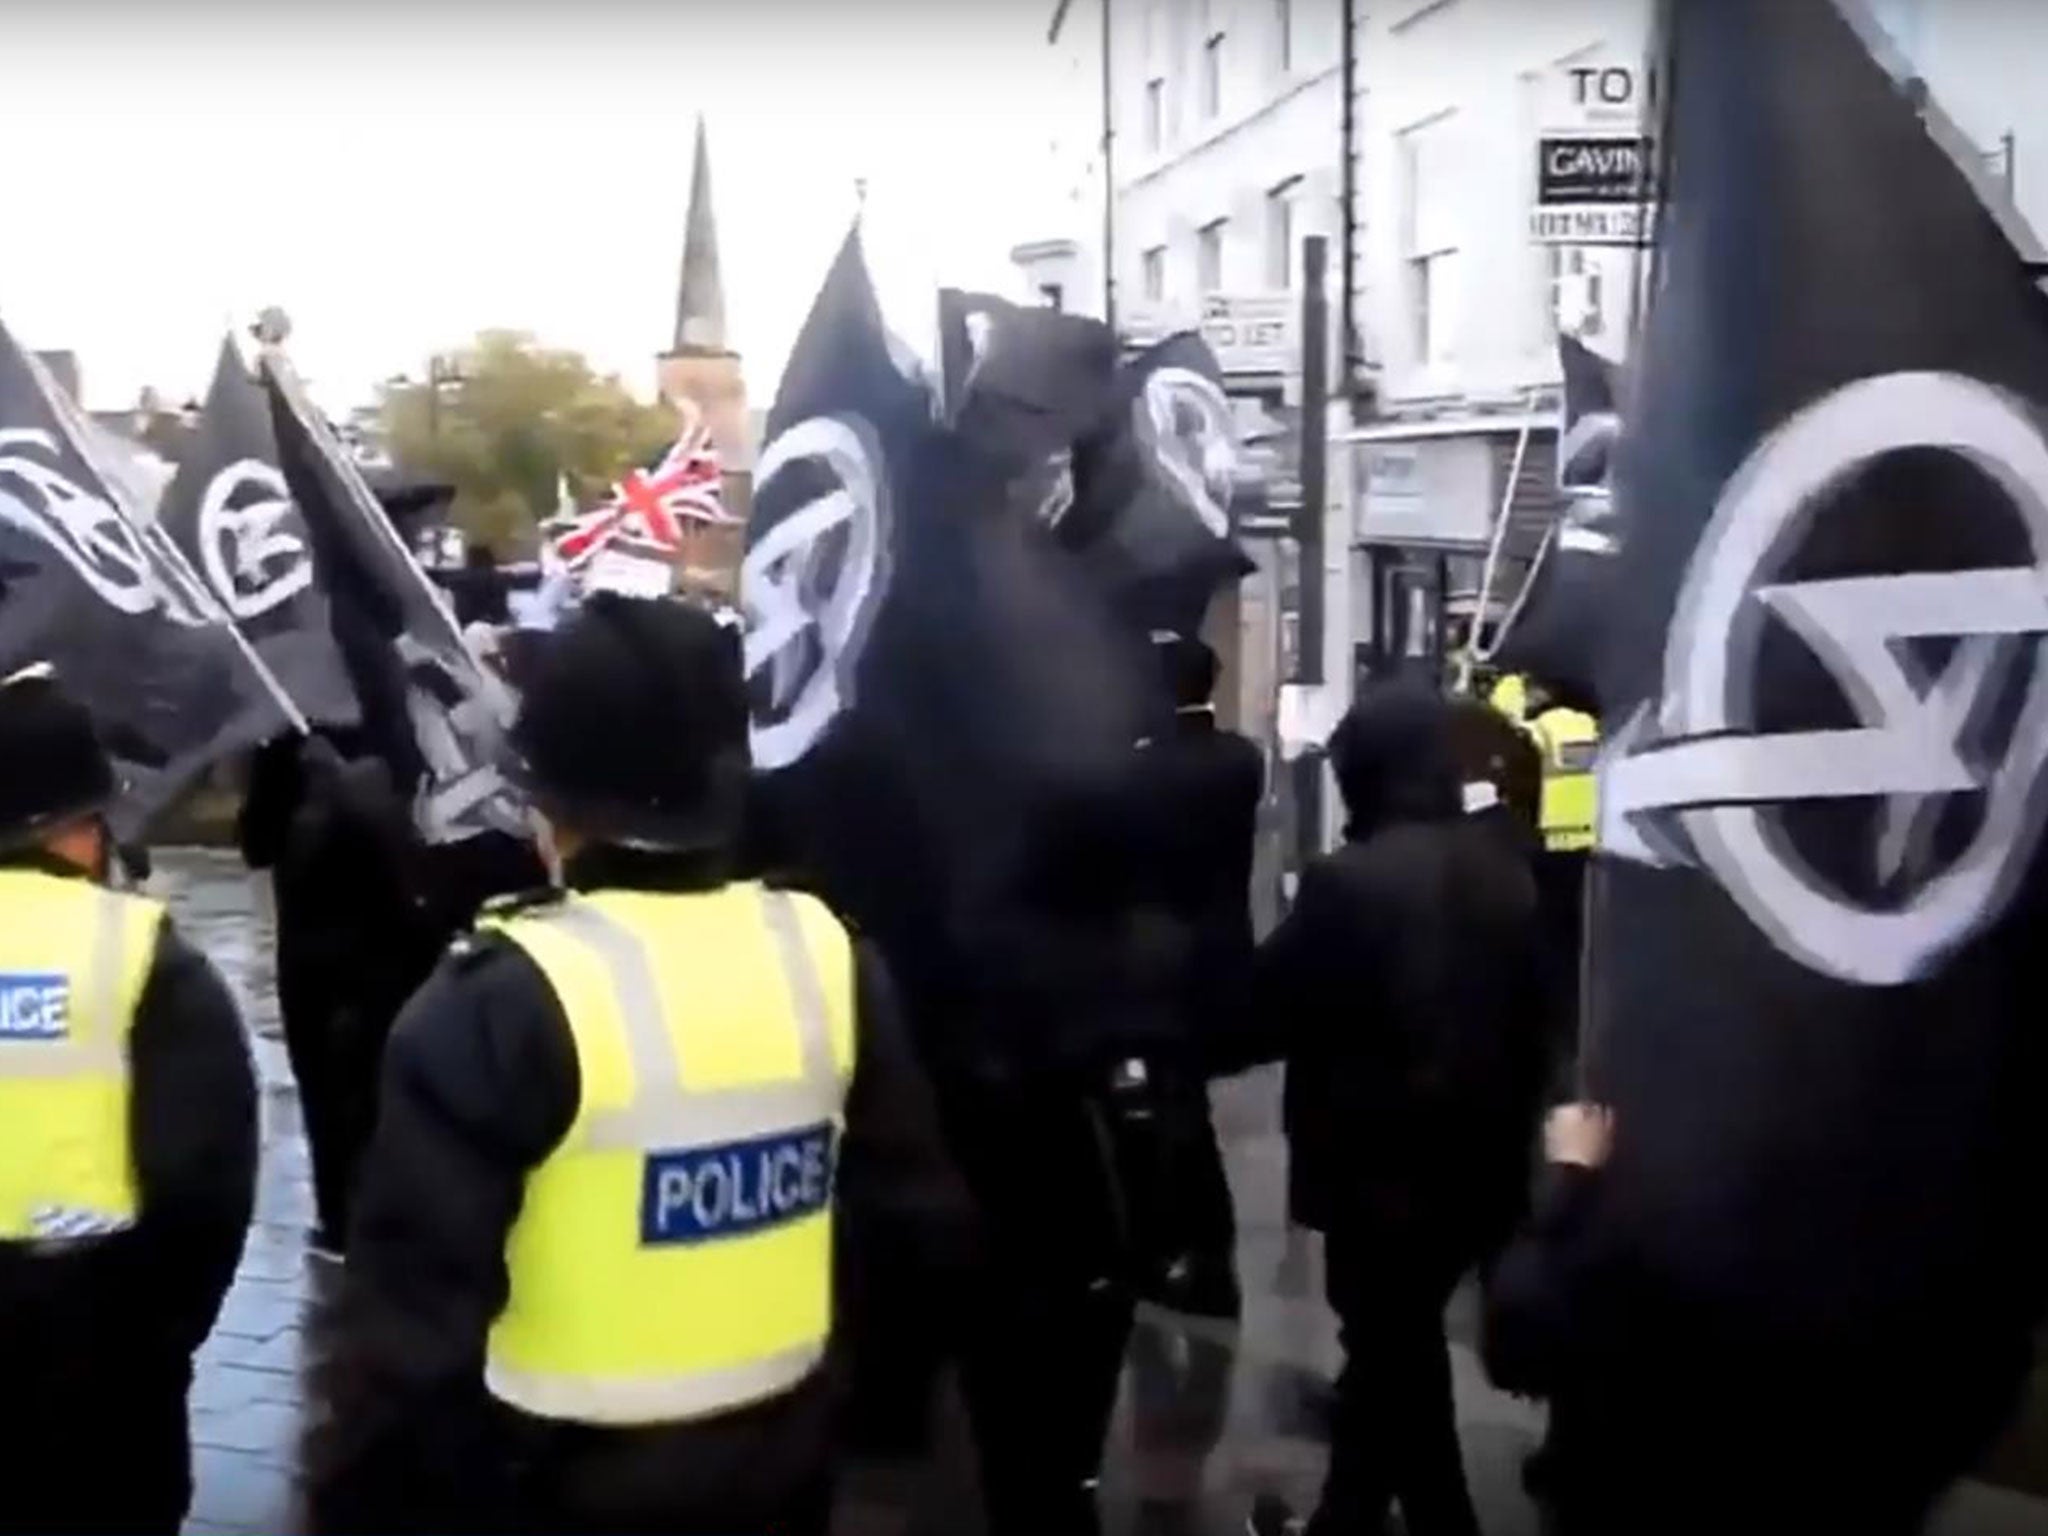 The video showed National Action members marching through Darlington and performing Nazi salutes in November 2016